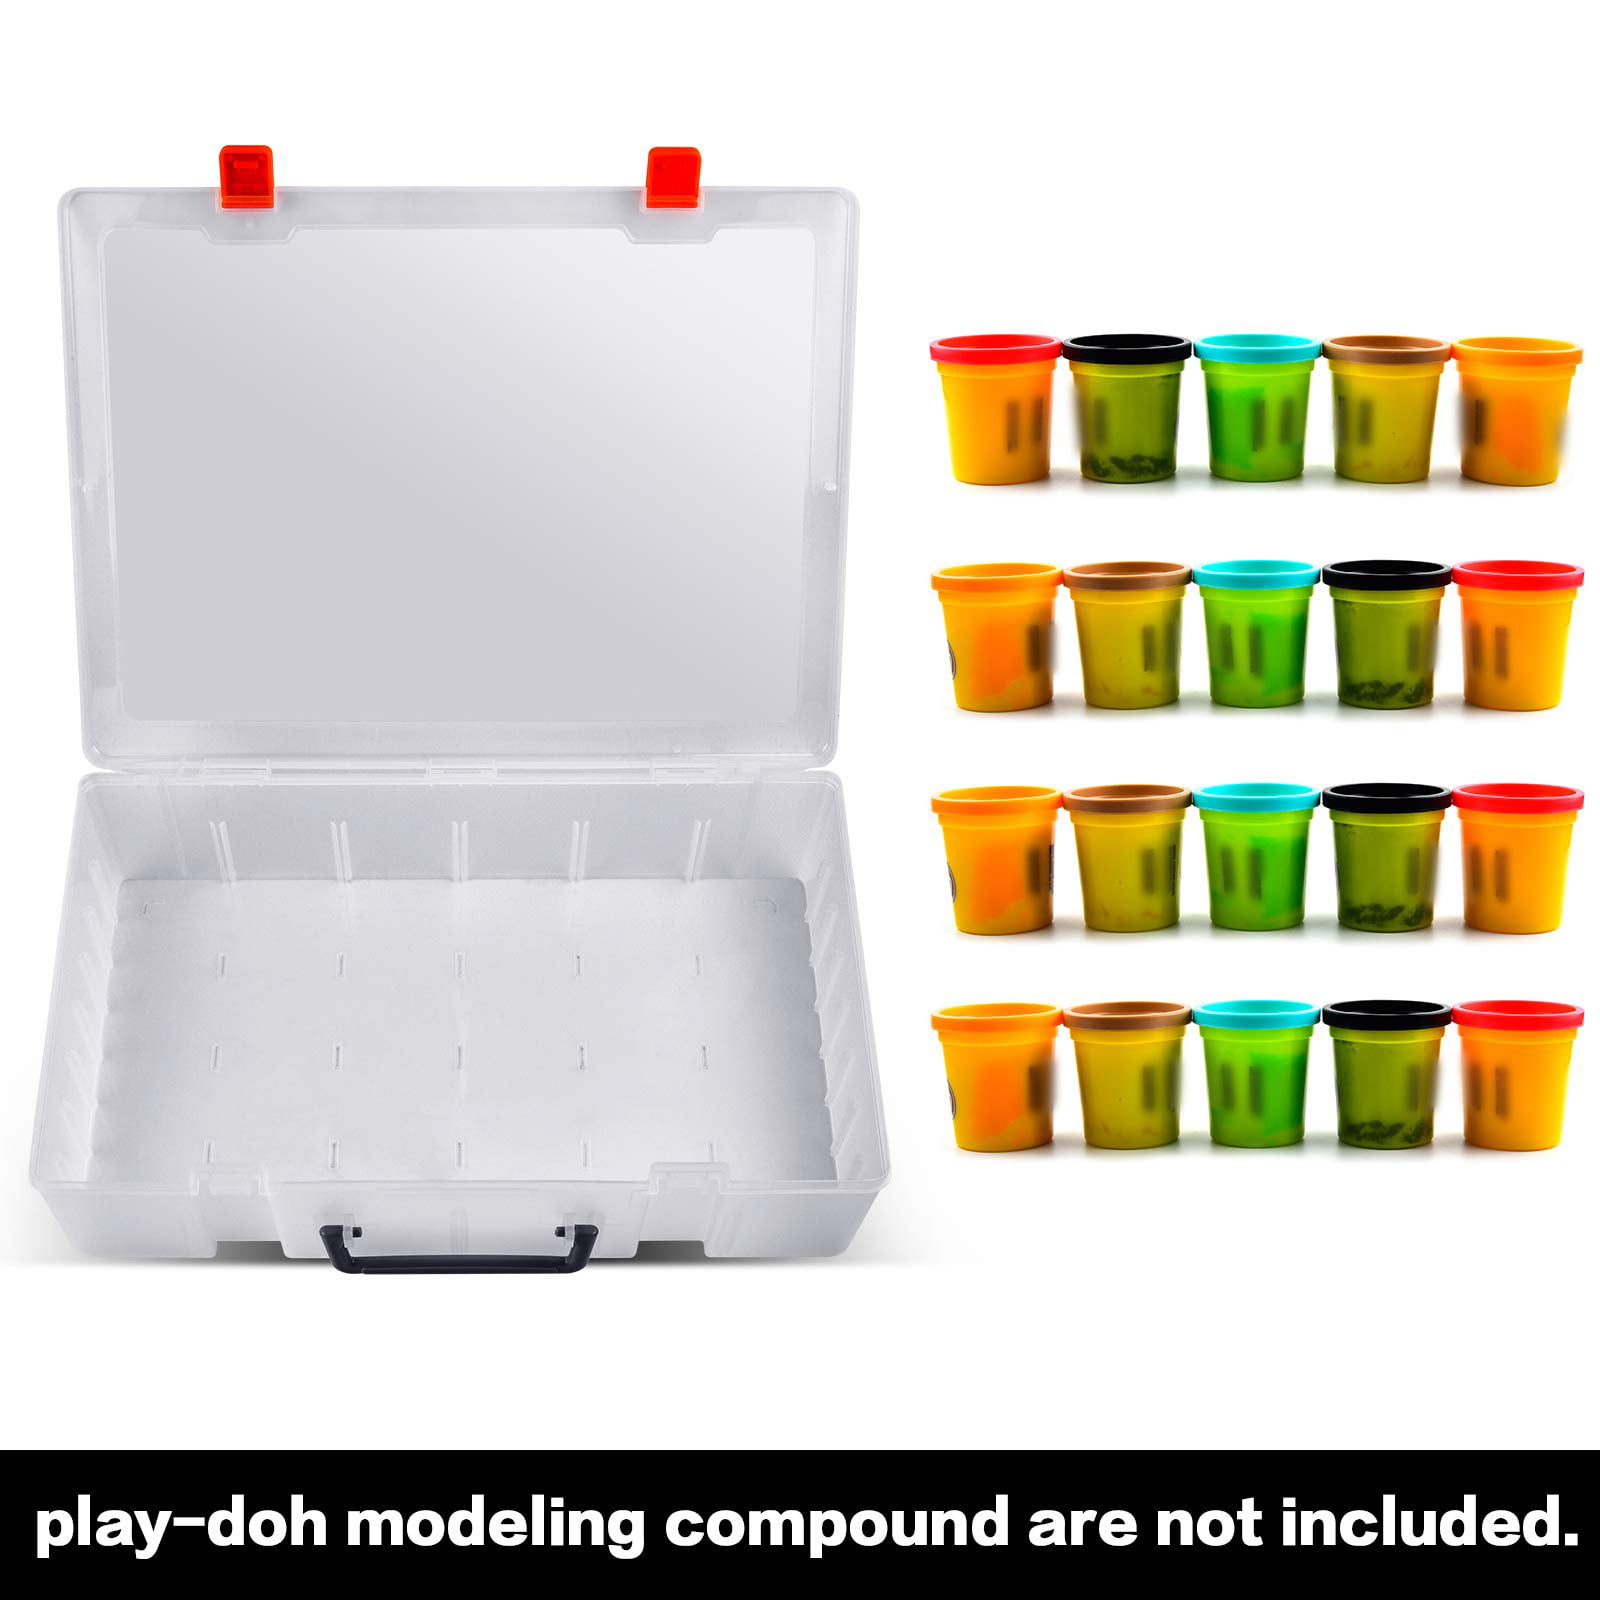 These containers would be great for all sorts of craft or toy storage!, Play Doh